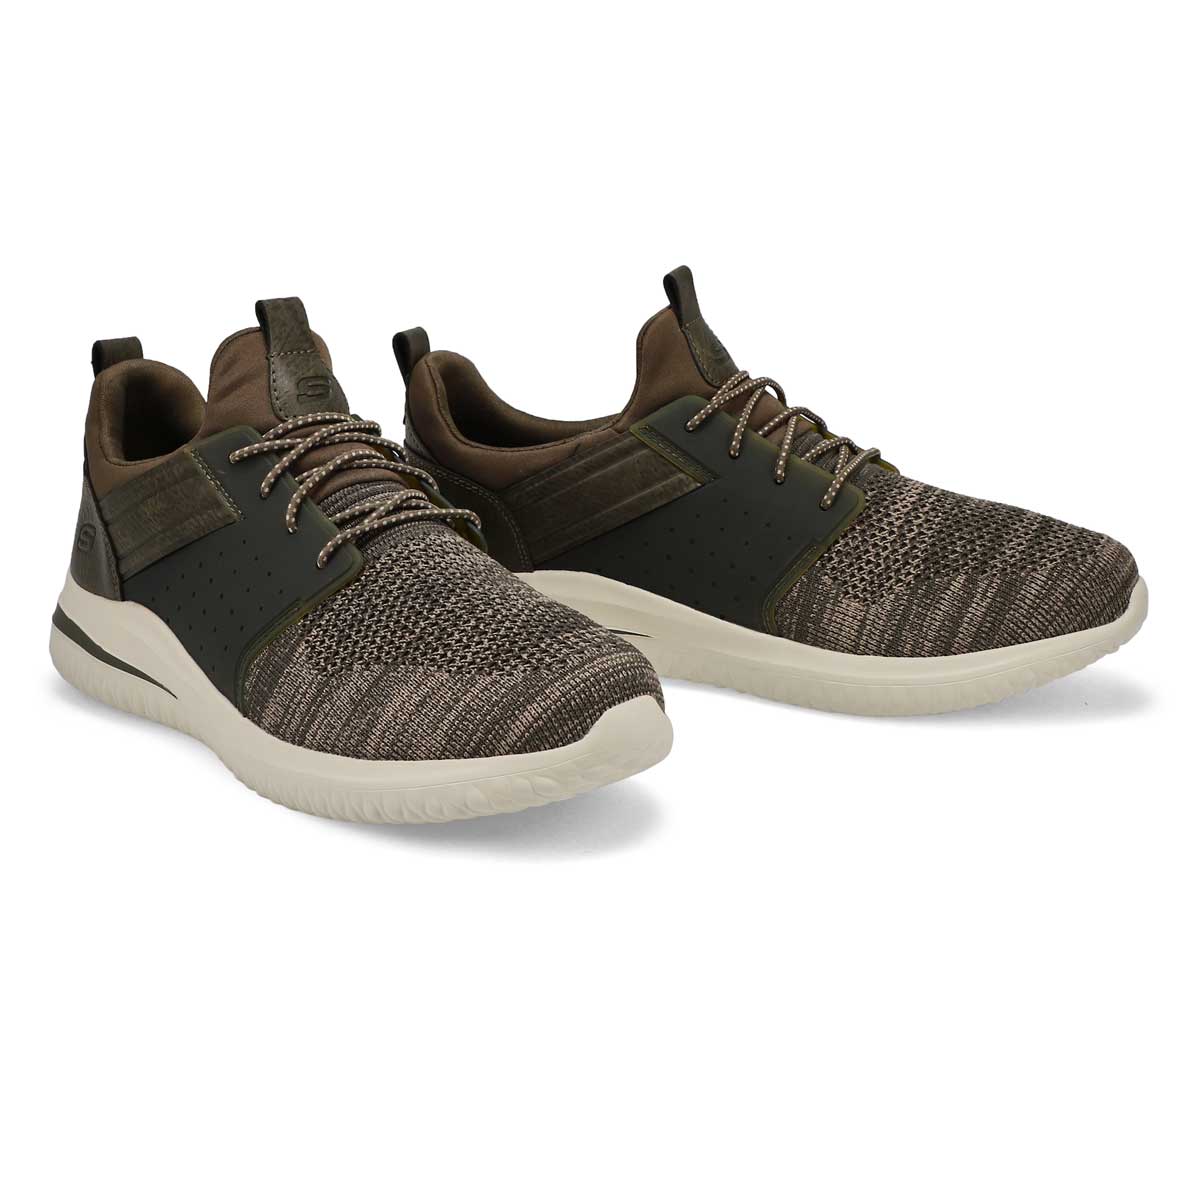 Men's Delson Camben 3.0 Sneakers - Olive